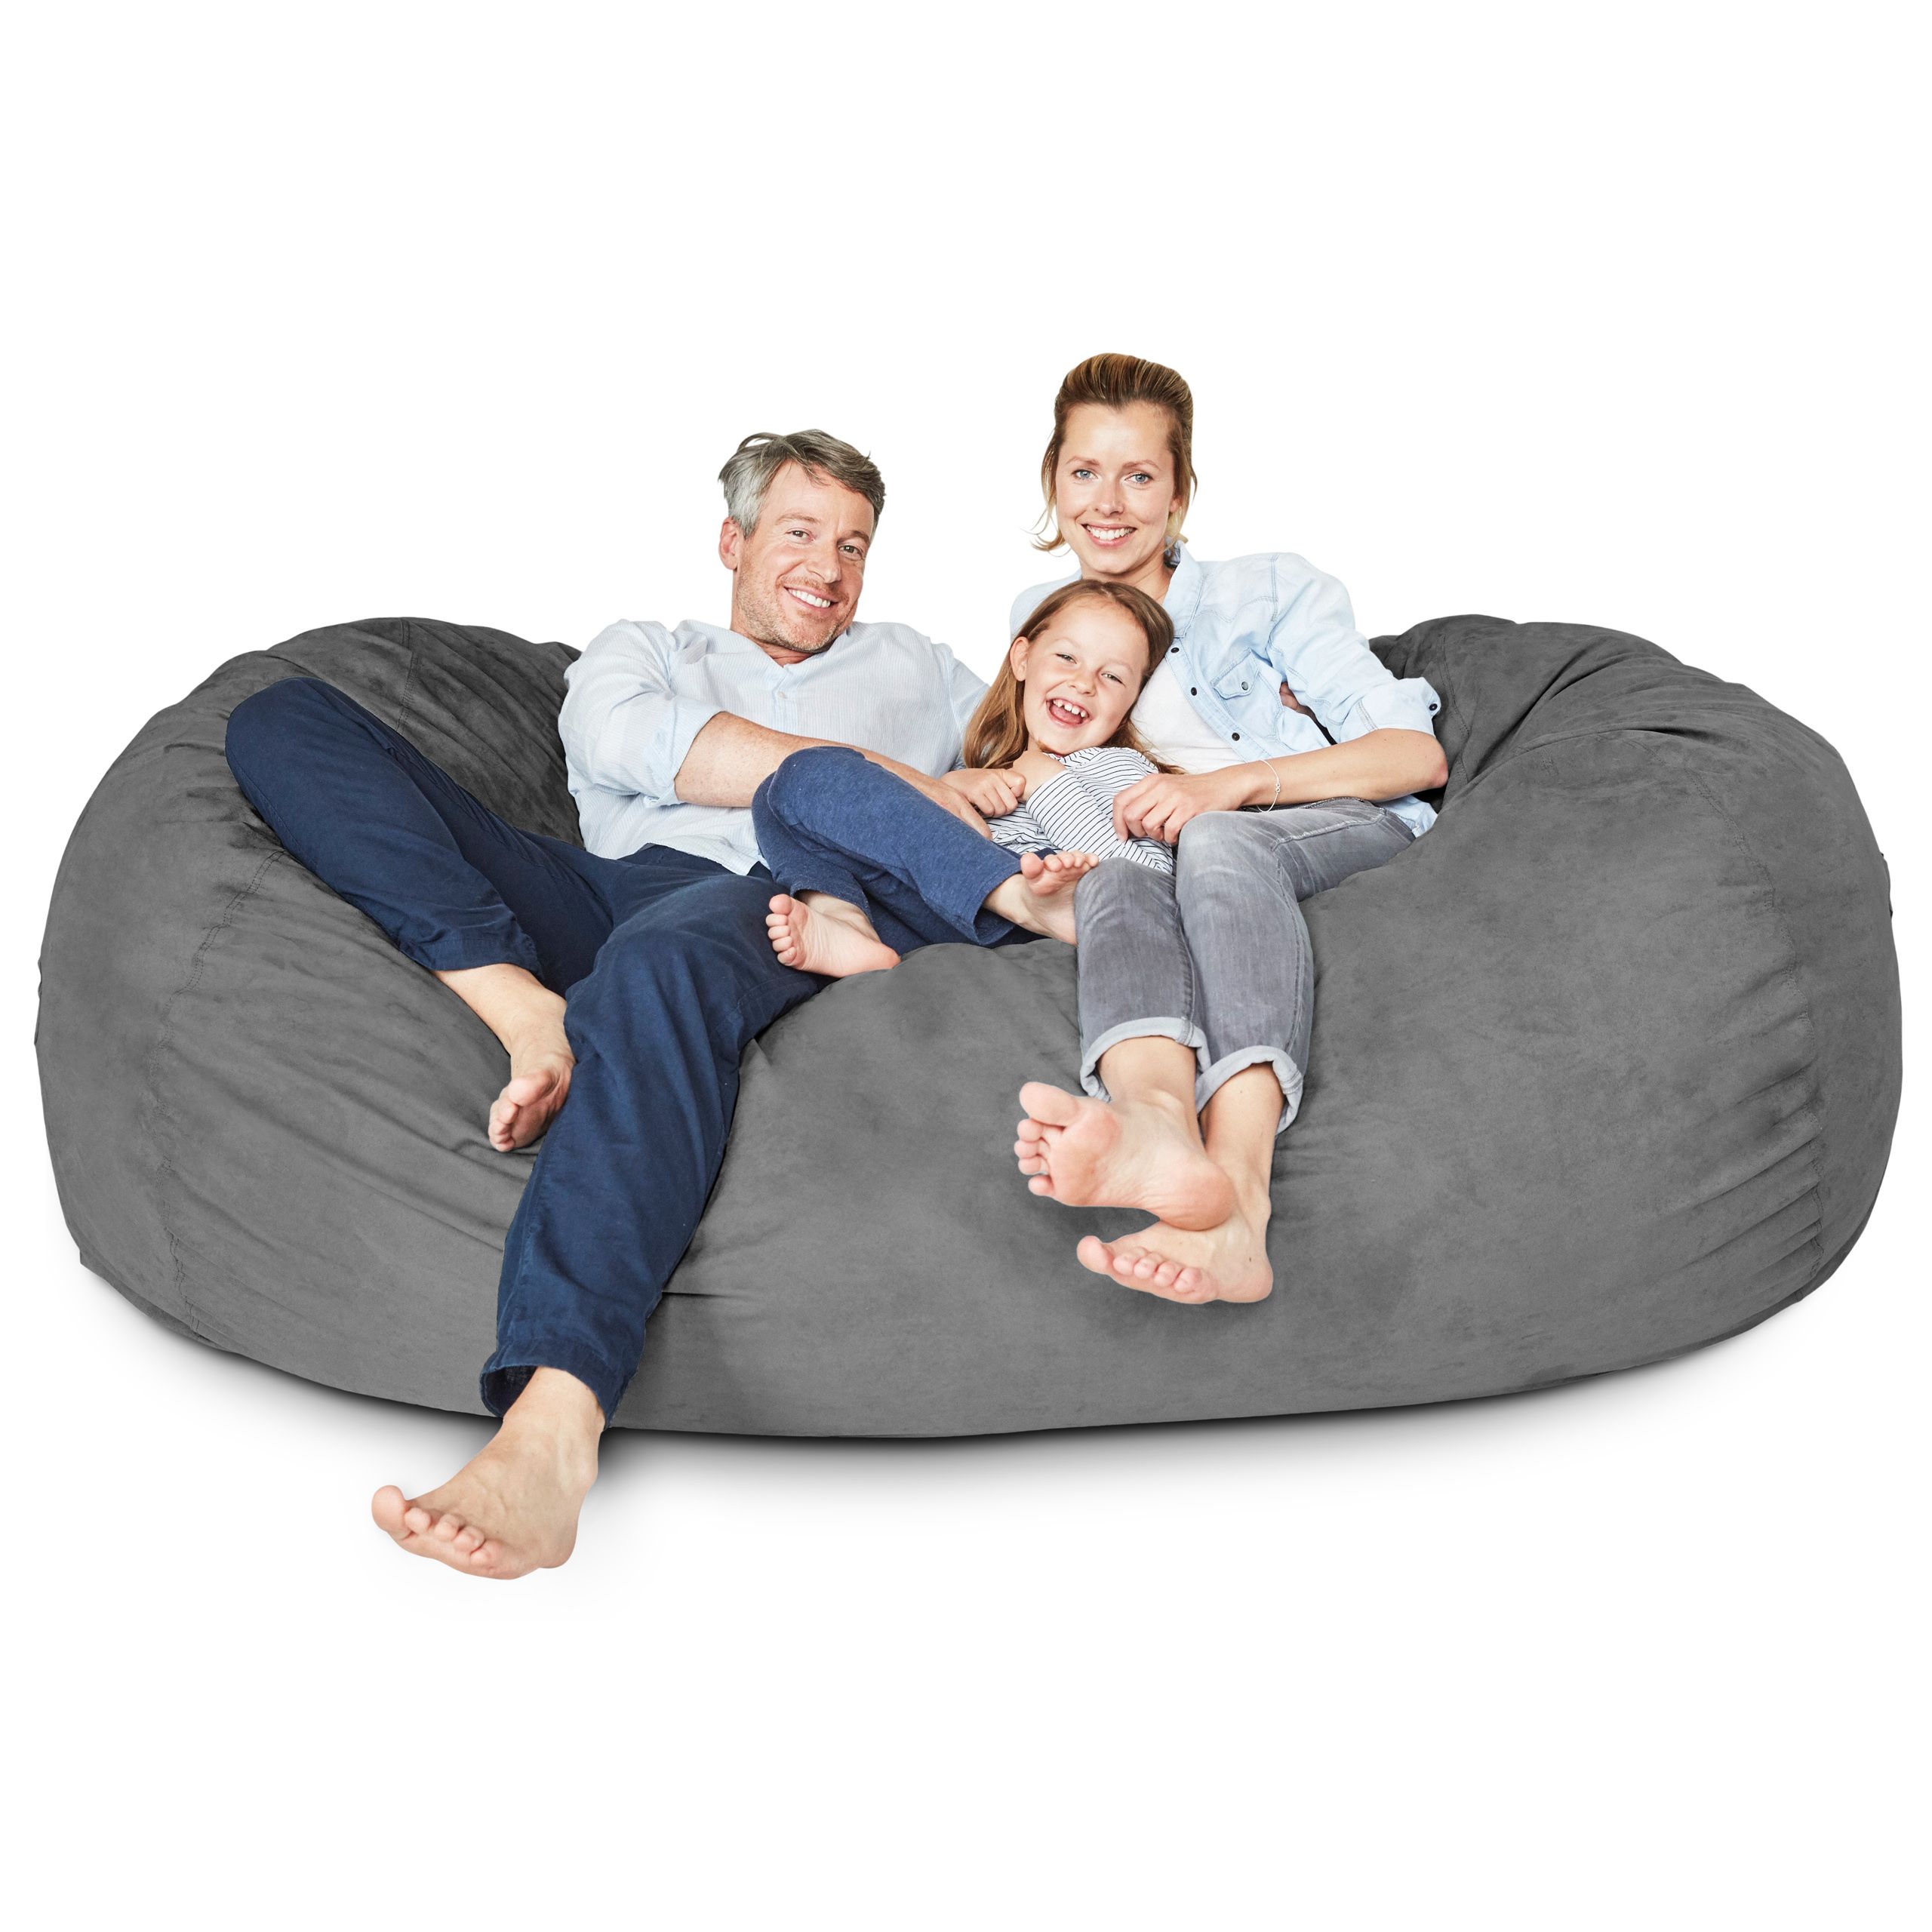 Lumaland Luxurious 7ft Giant Bean Bag Chair with Microsuede Cover - Ultra Soft, Foam Filling, Was... | Walmart (US)